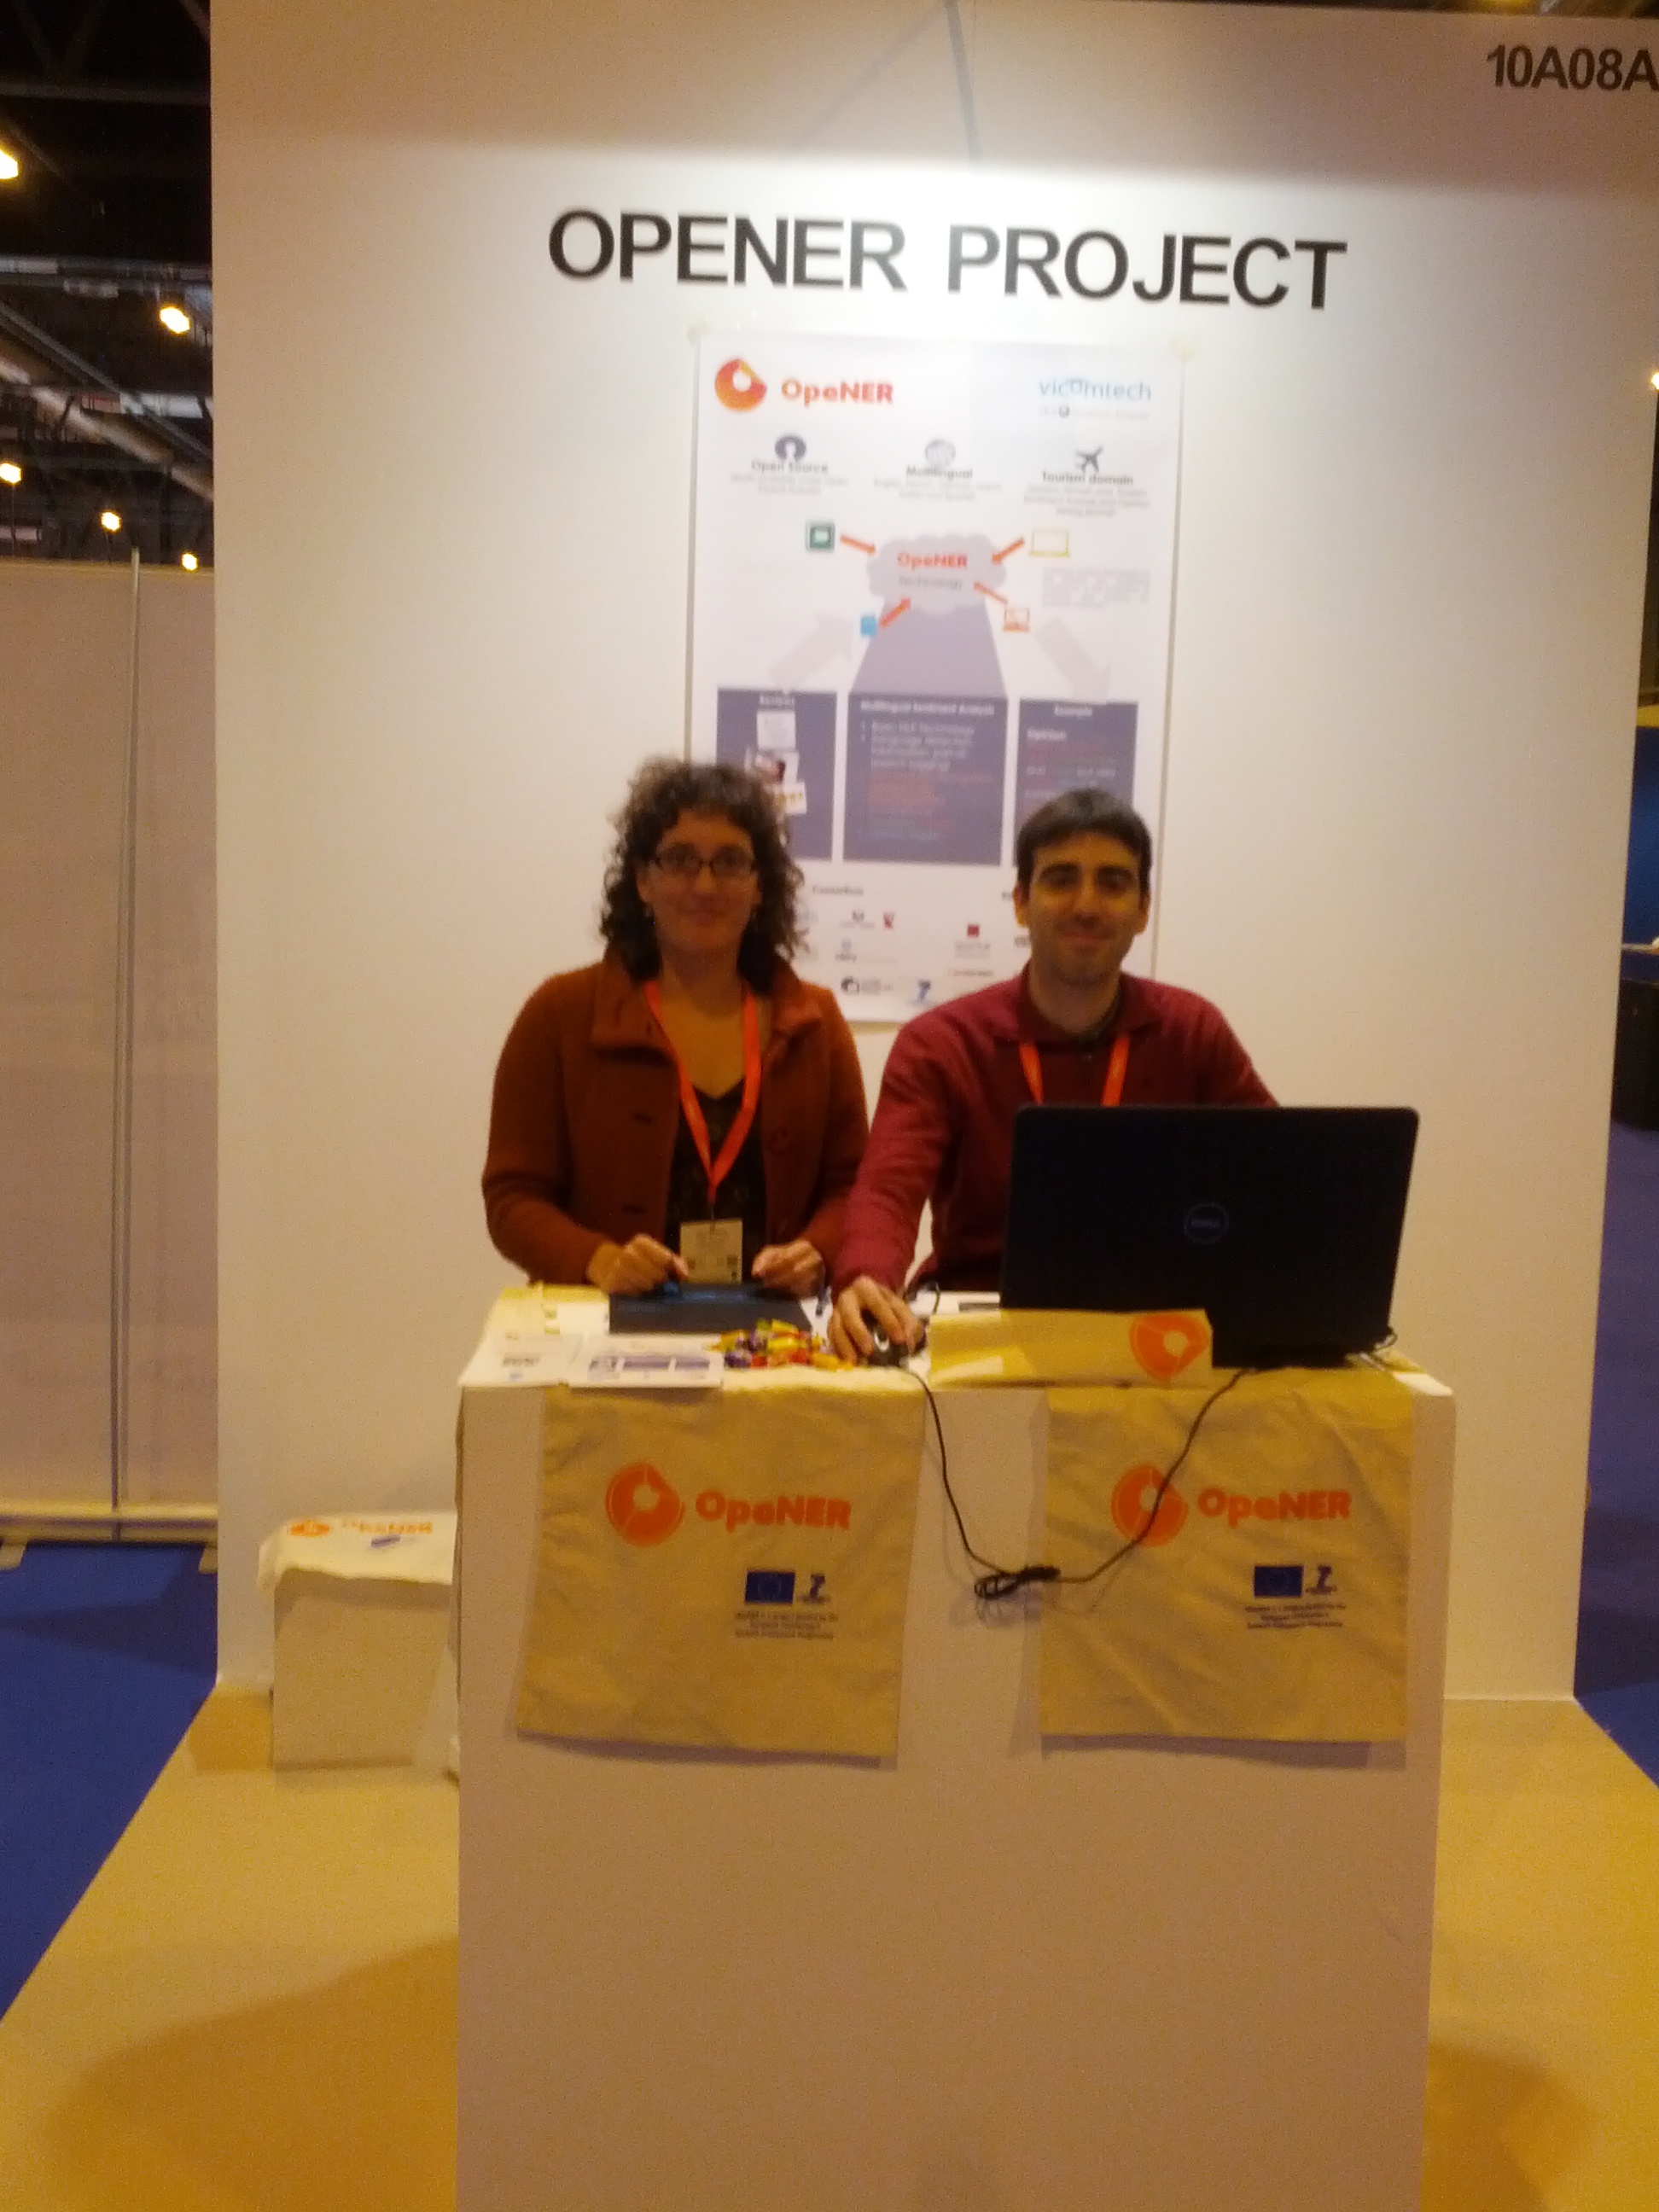 OpeNER FP7 project at FITUR, the International Tourism Trade Fair, from 22nd to 26th January 2014